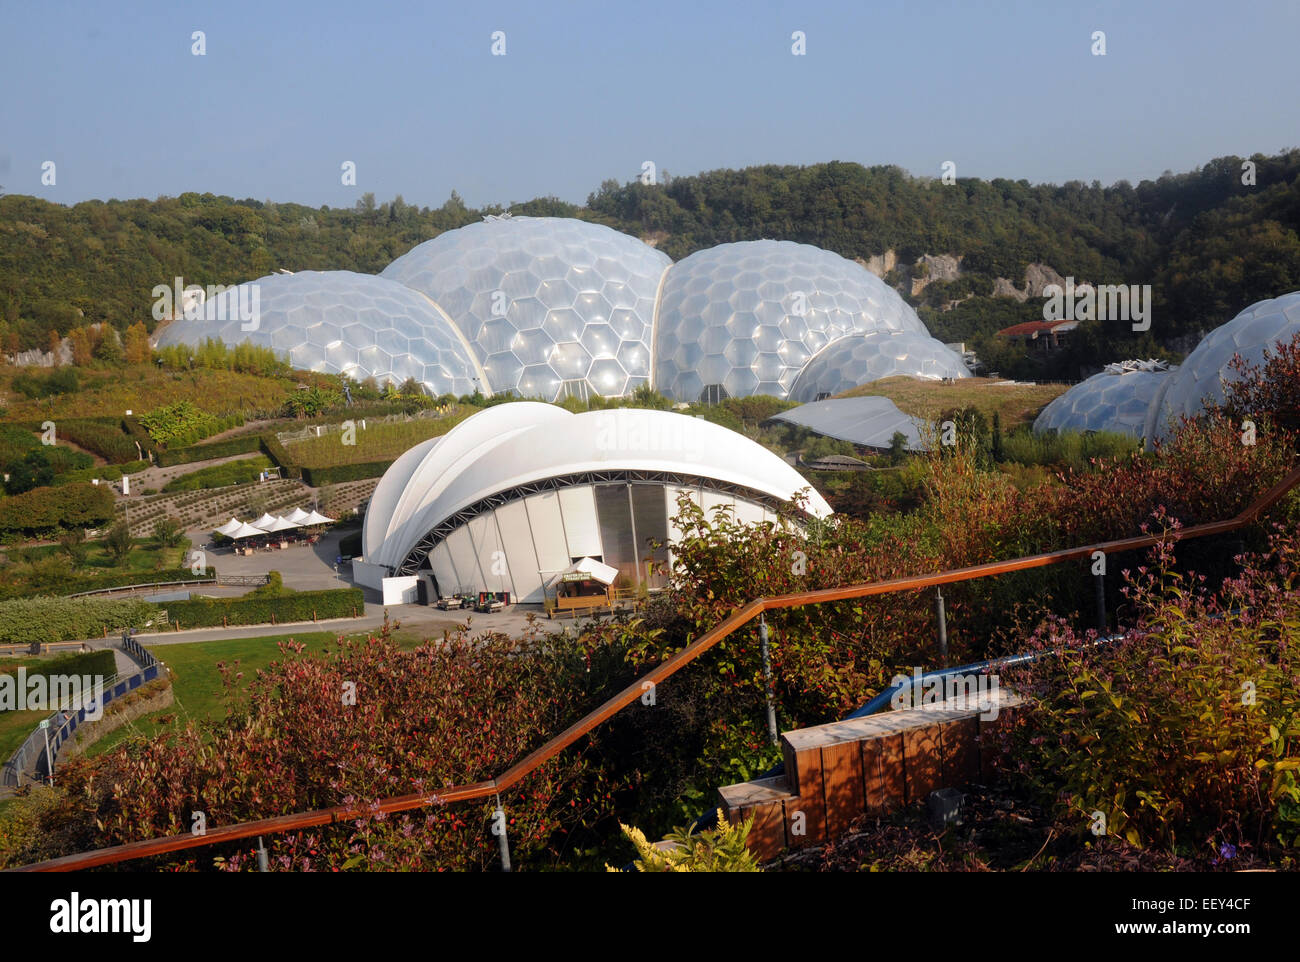 Settembre 2014 l'Eden Project vicino a St. Austell, Cornwall. Pic Mike Walker, Mike Walker foto Foto Stock